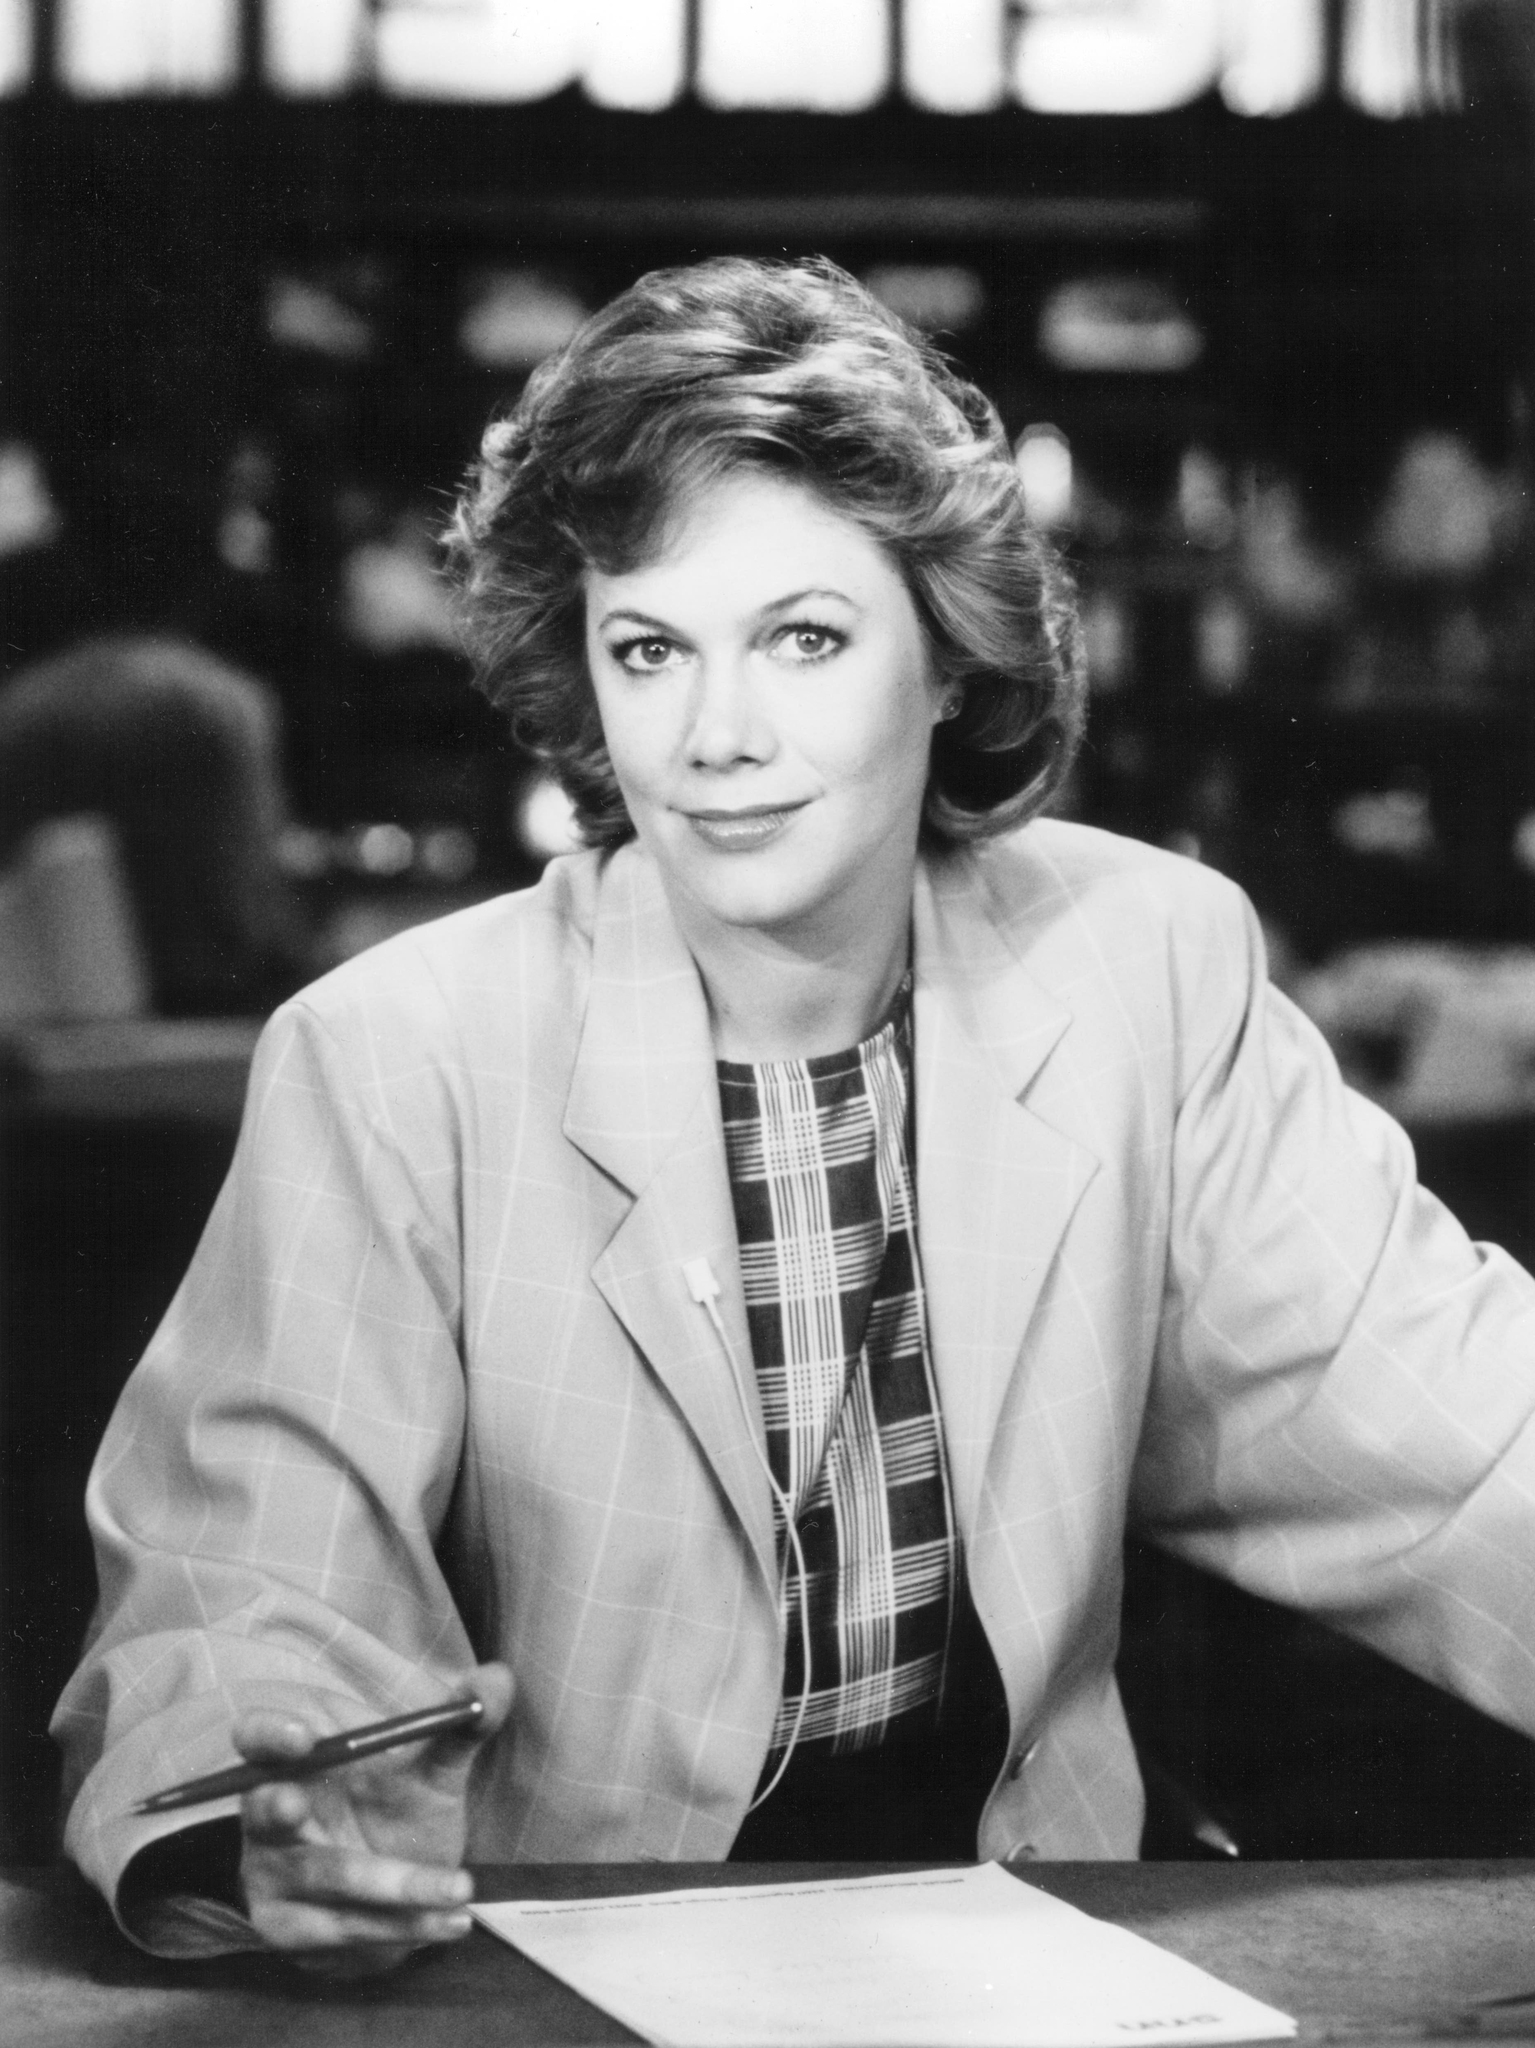 Still of Kathleen Turner in Switching Channels (1988)